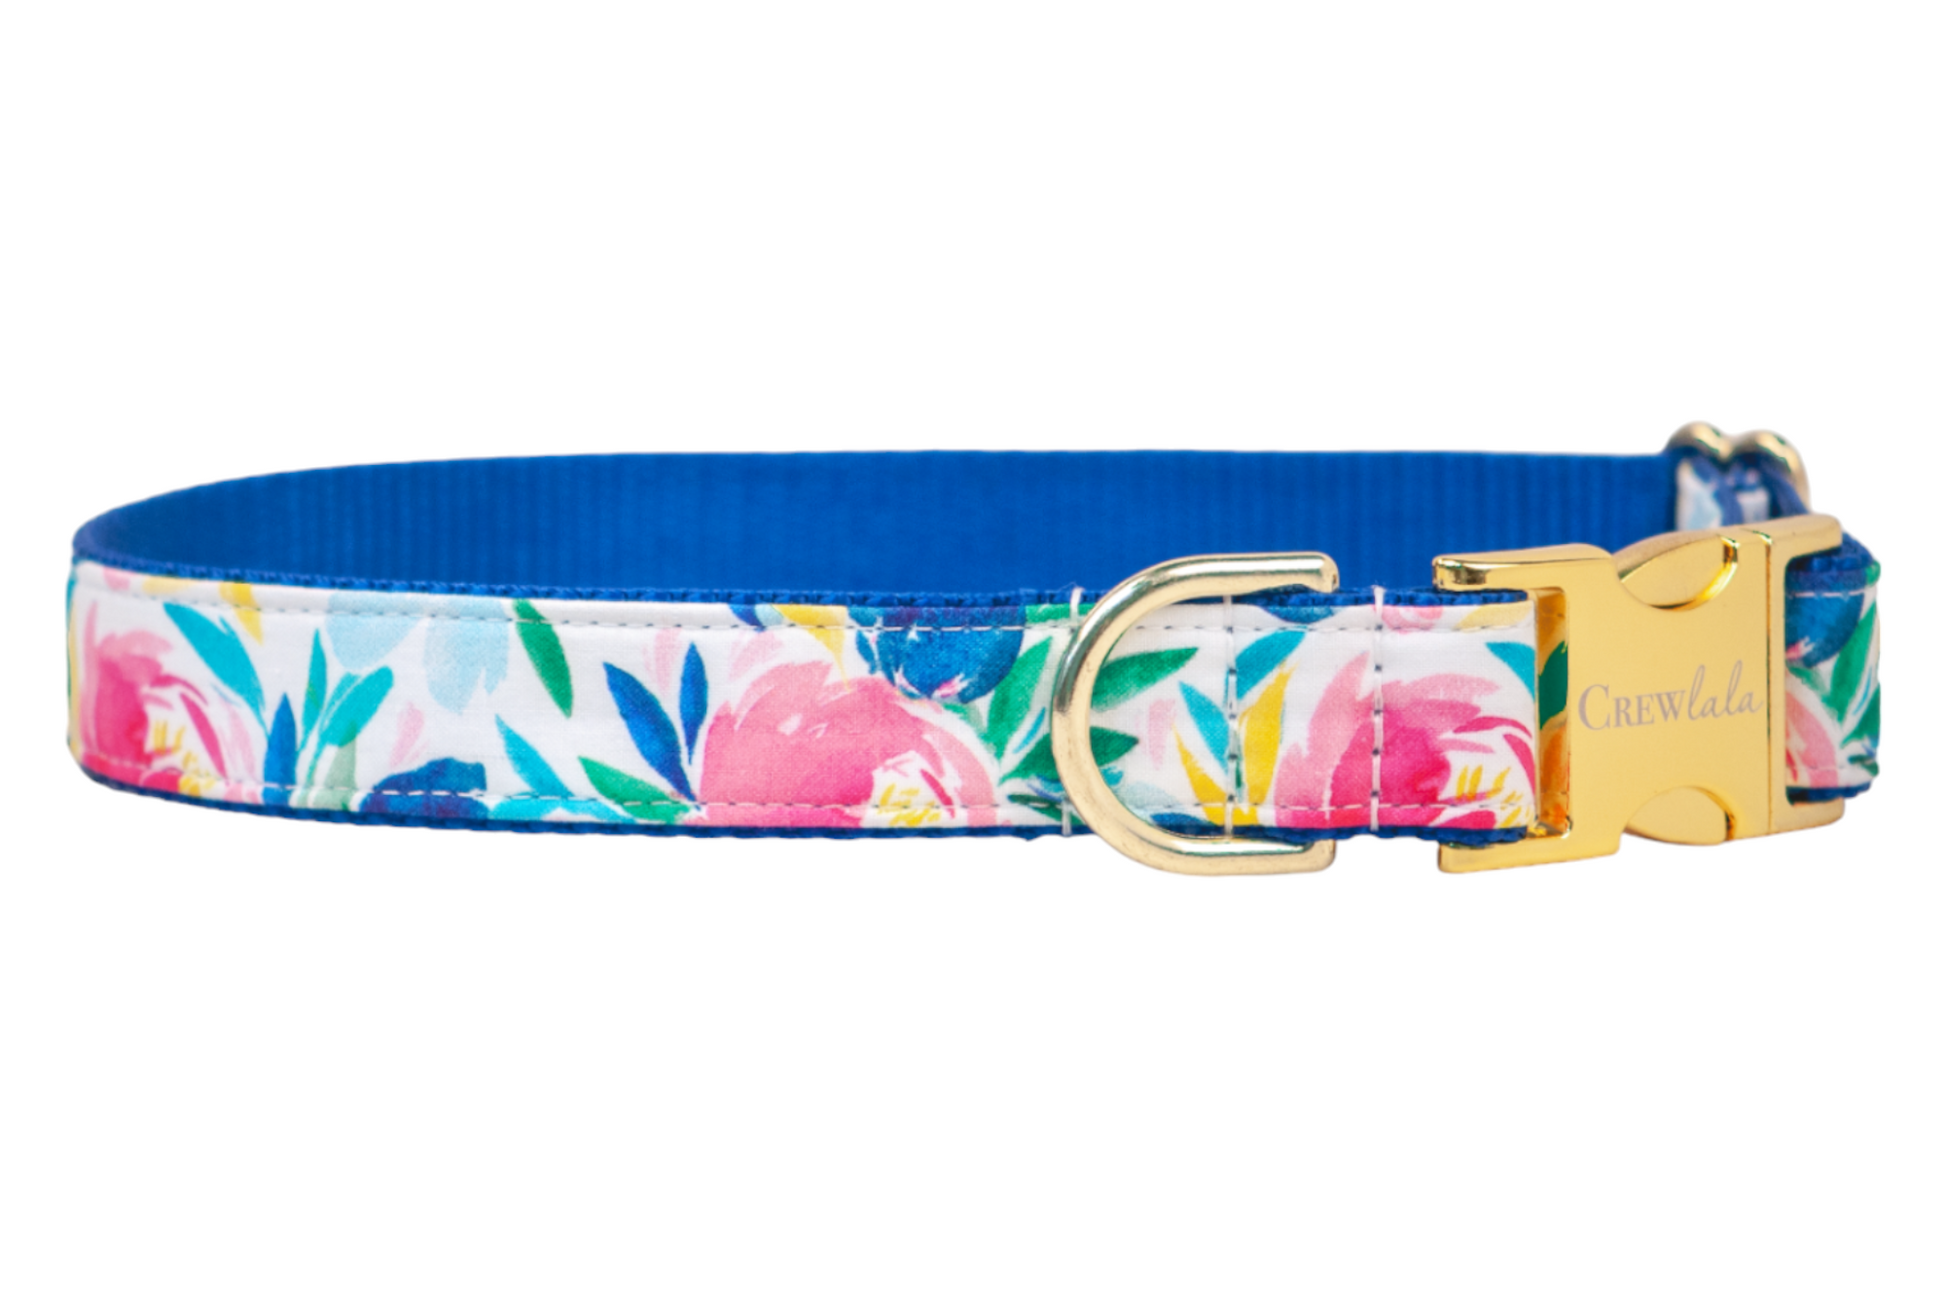 Floral Gallery Belle Bow Dog Collar - Crew LaLa